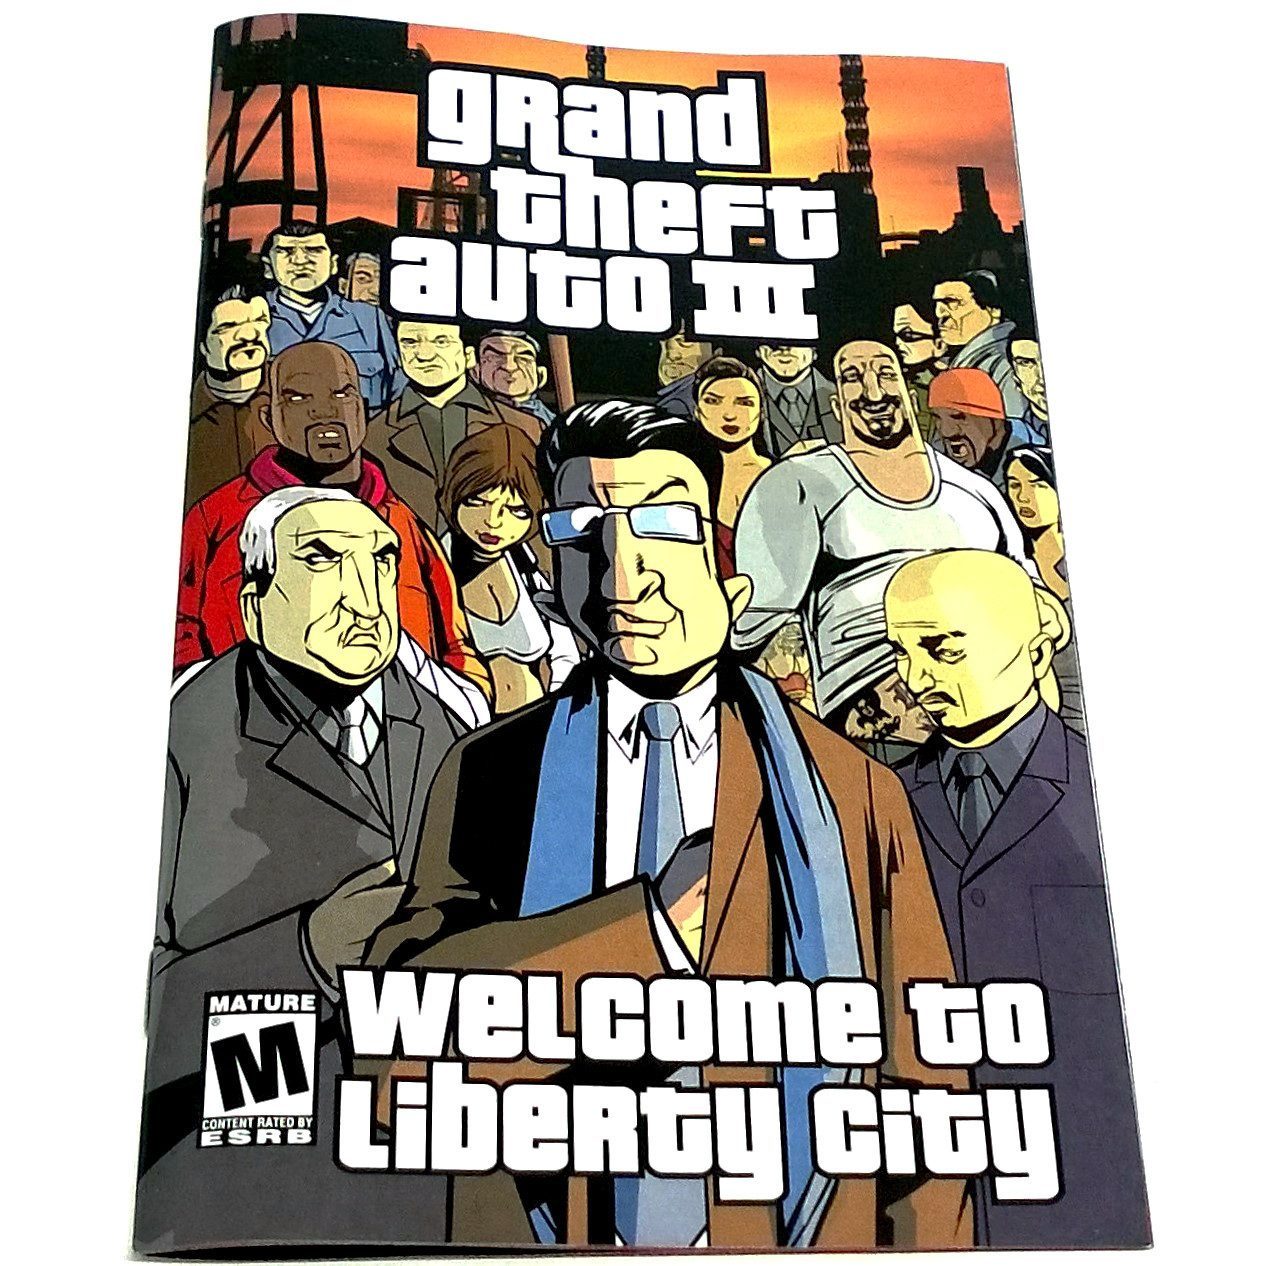 Grand Theft Auto III for PC CD-ROM - Front of manual